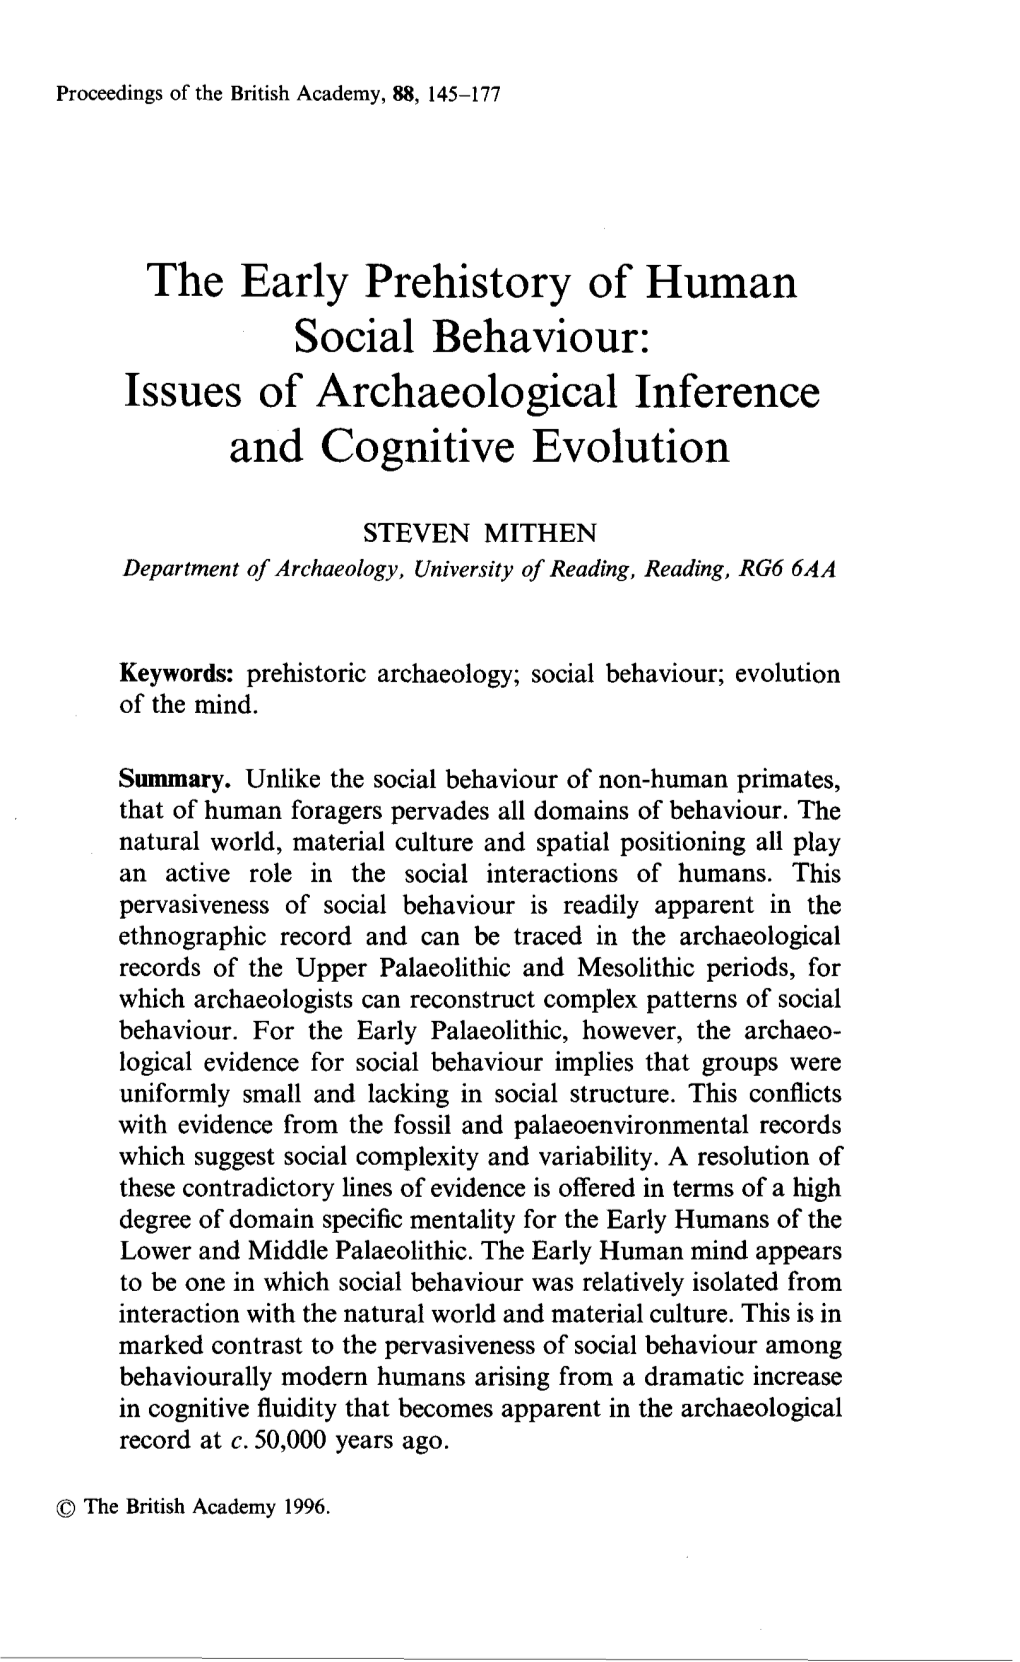 The Early Prehistory of Human Social Behaviour: Issues of Archaeological Inference and Cognitive Evolution